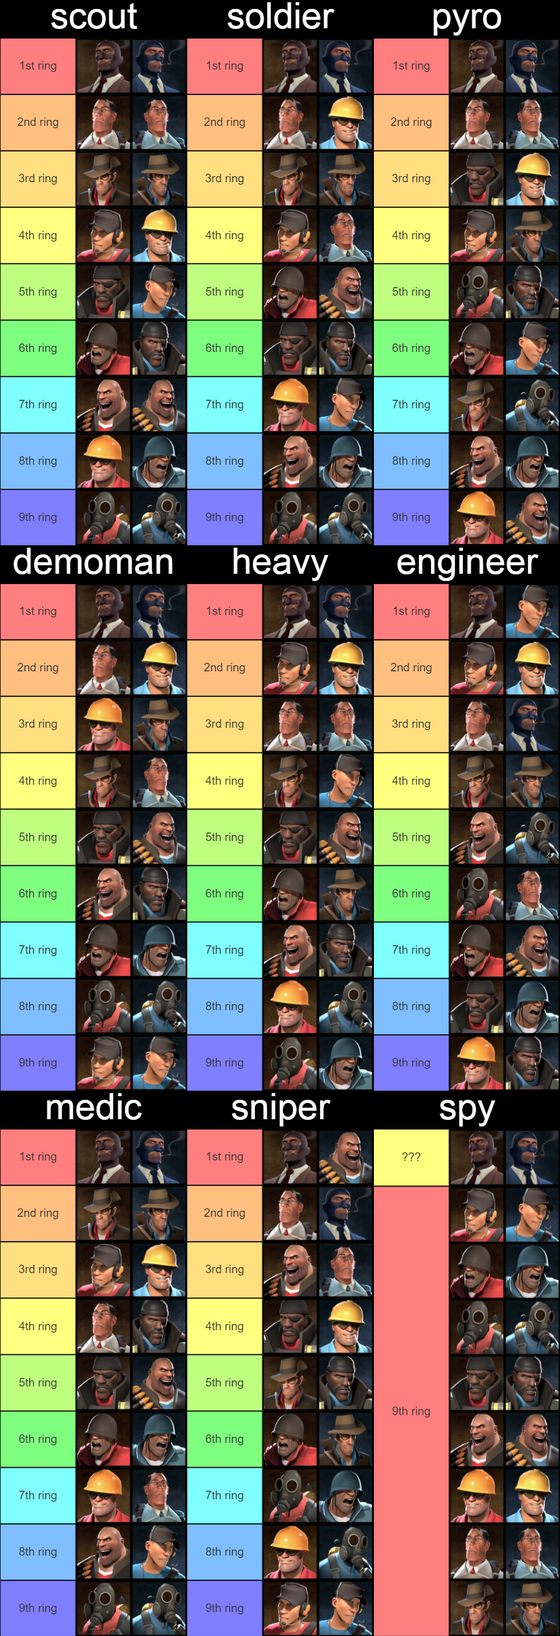 class wars enemy team difficulty tier list based on dante's inferno